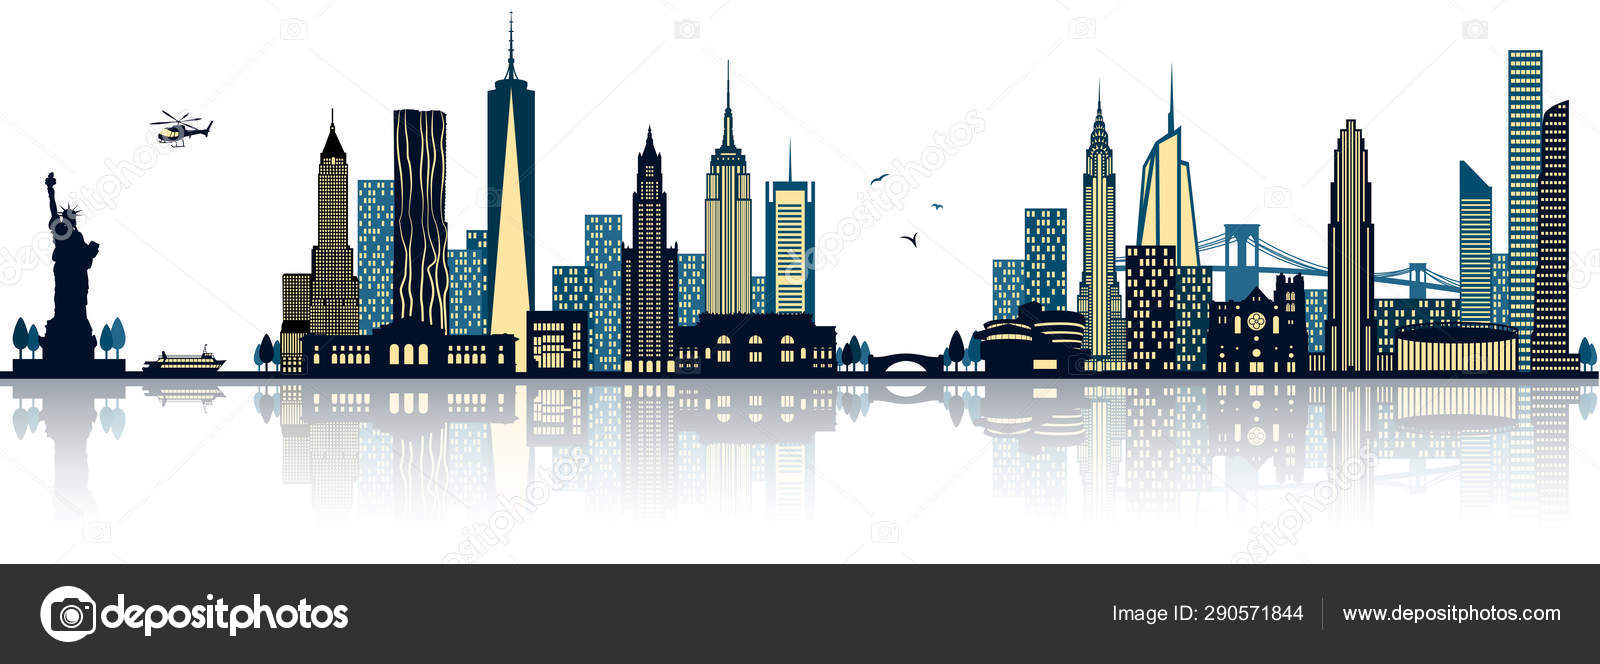 New York Skyline Silhouette Simply Vector Illustration Vector Image By C Pixelliebe Vector Stock